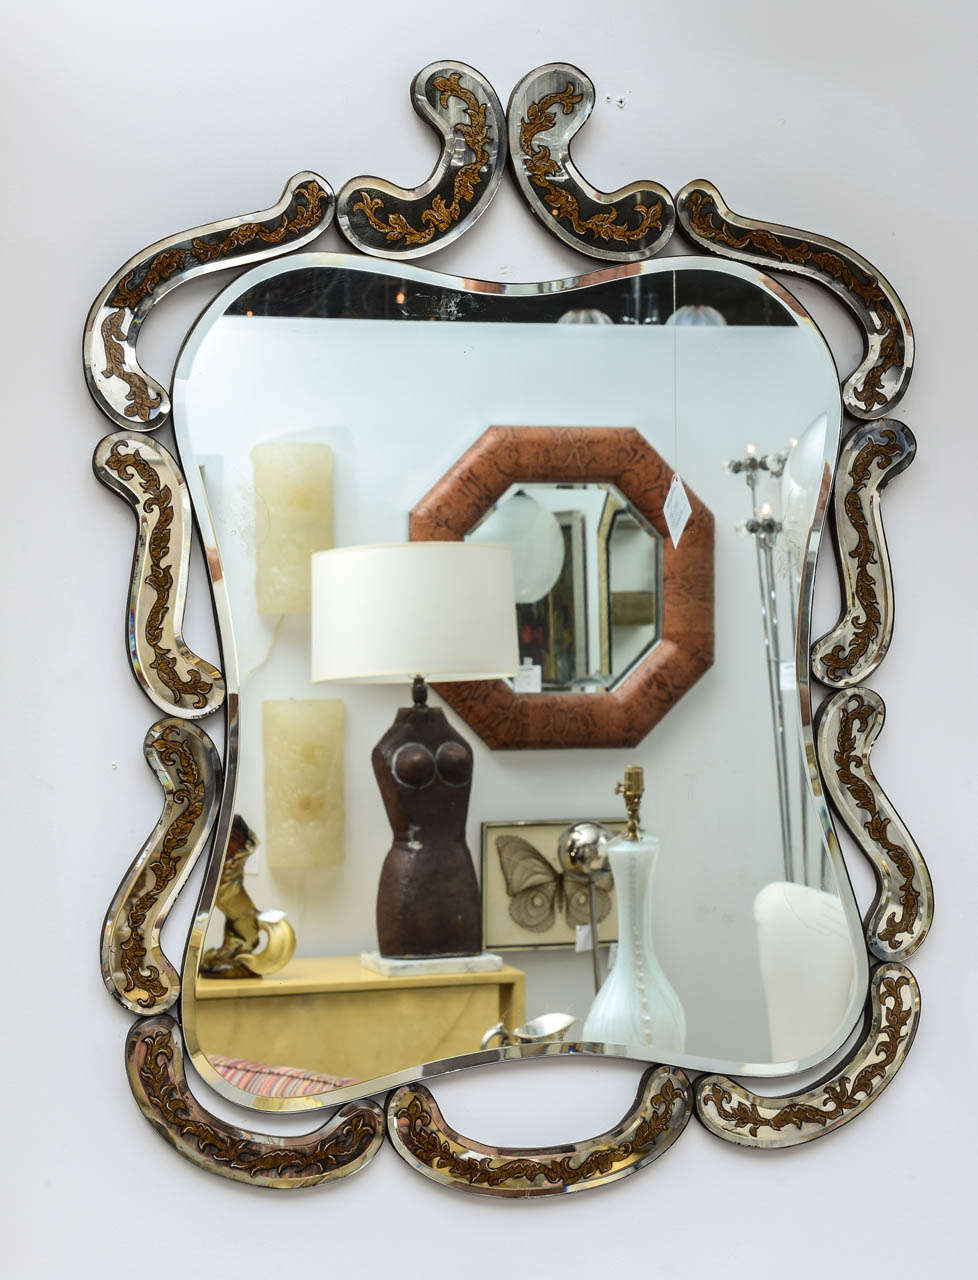 Vintage Italian reverse painted mirror with rounded corners, framed by individual scroll like pieces of mirror that contain reverse painted garlands of leaves.